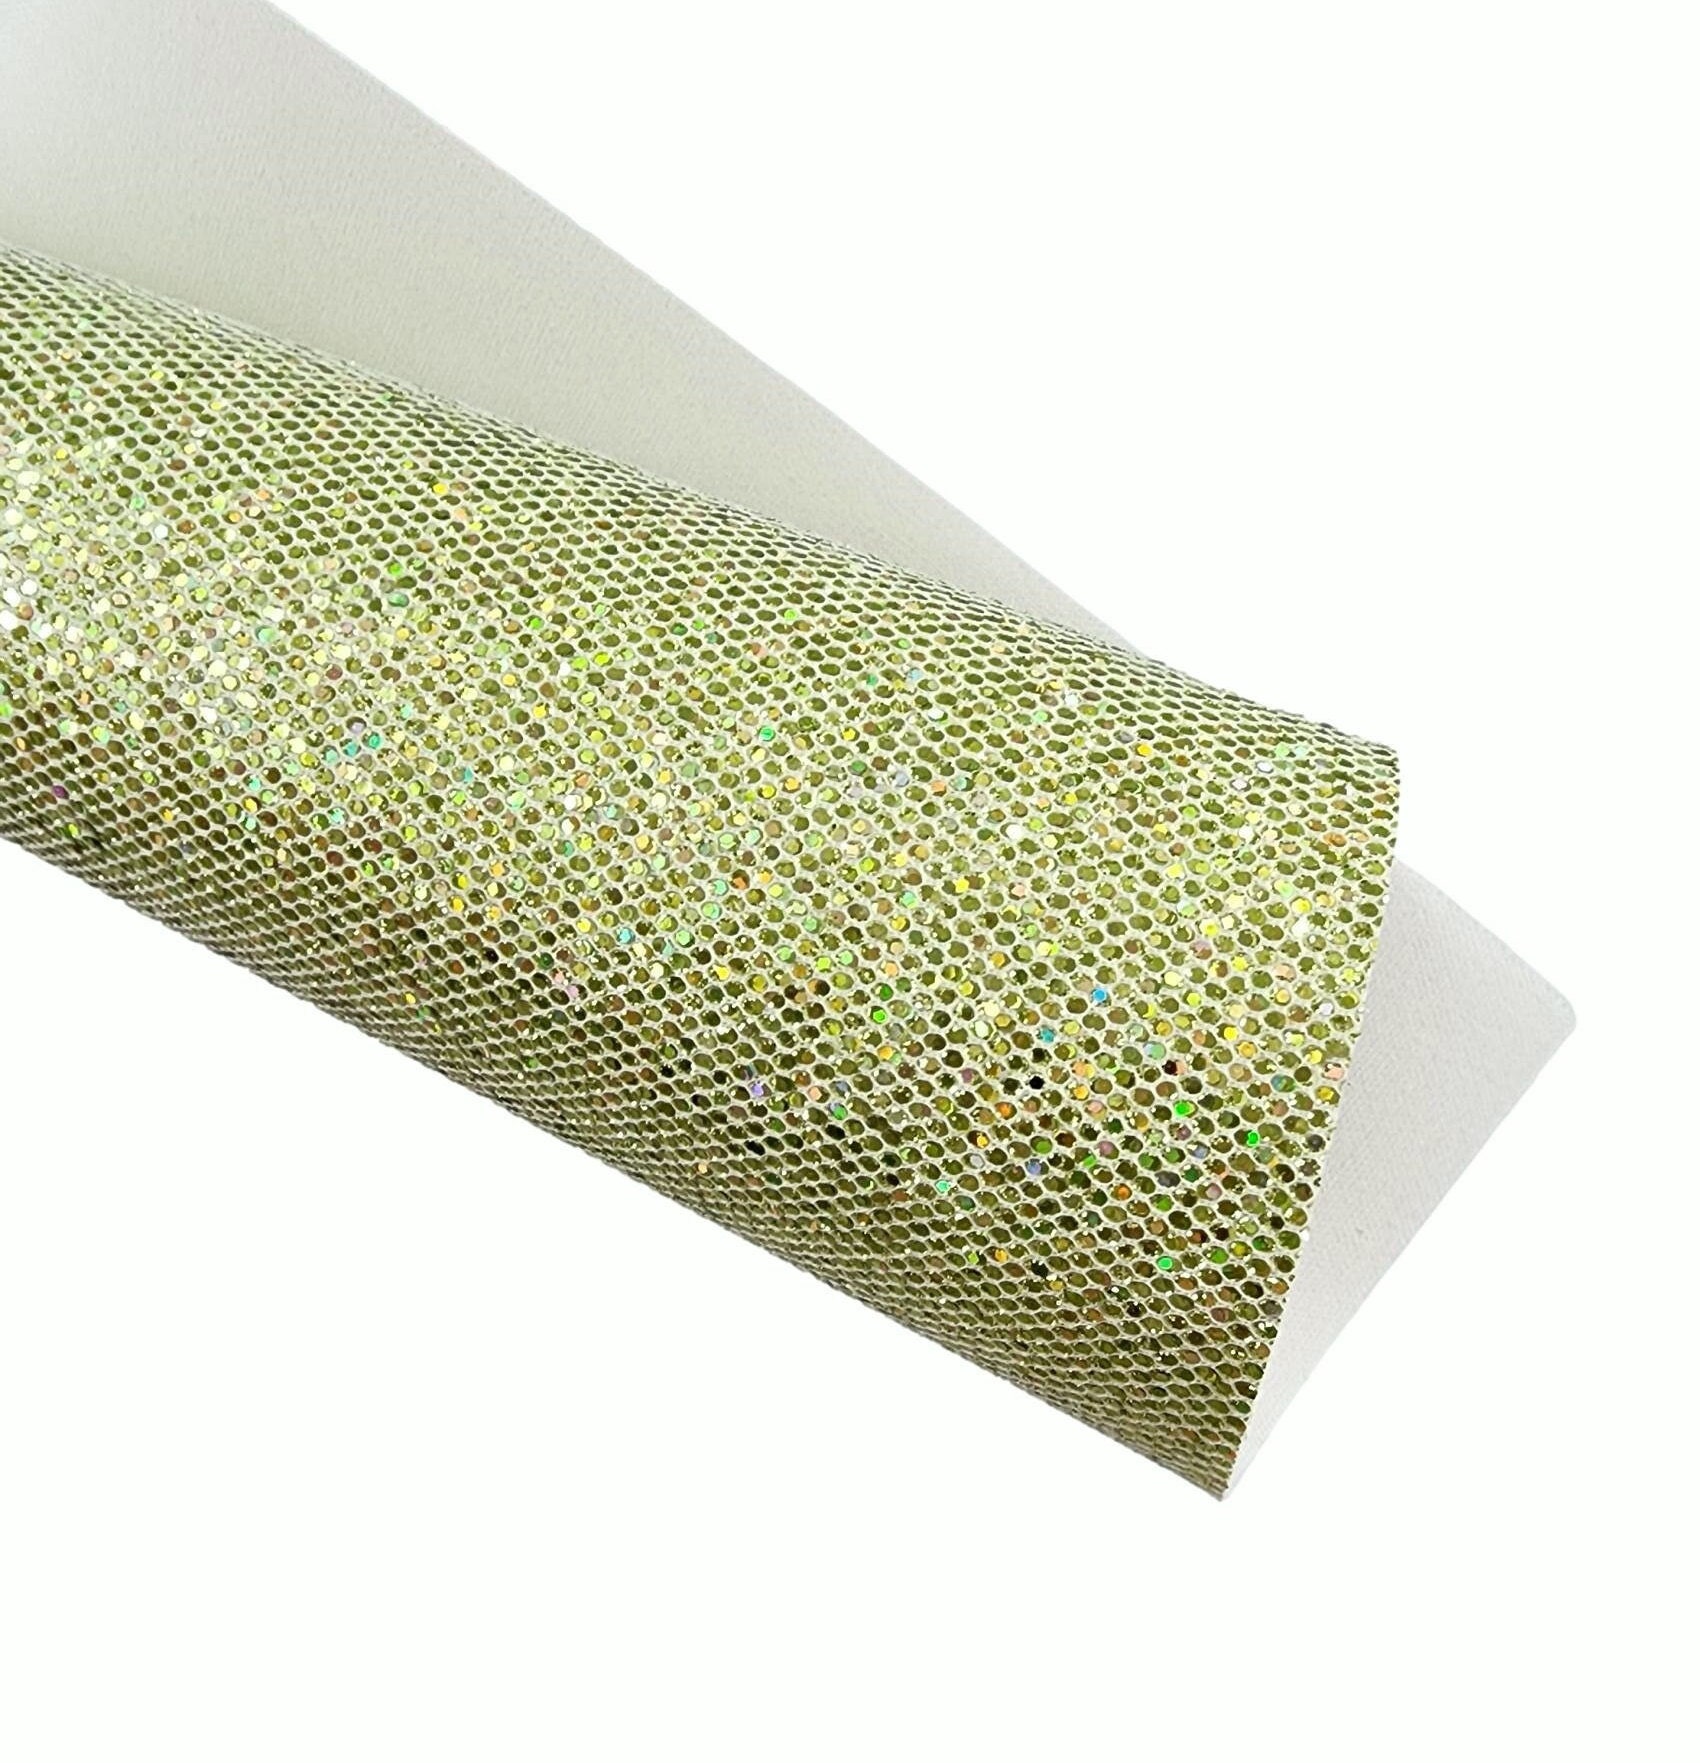 Copper Fabric Metallic Sheer Stretch Fabric, Red Gold Iridescent Mesh  Fabric, Shiny Fabric, Polyester Knit Fabric Stretchy Glitter Fabric 